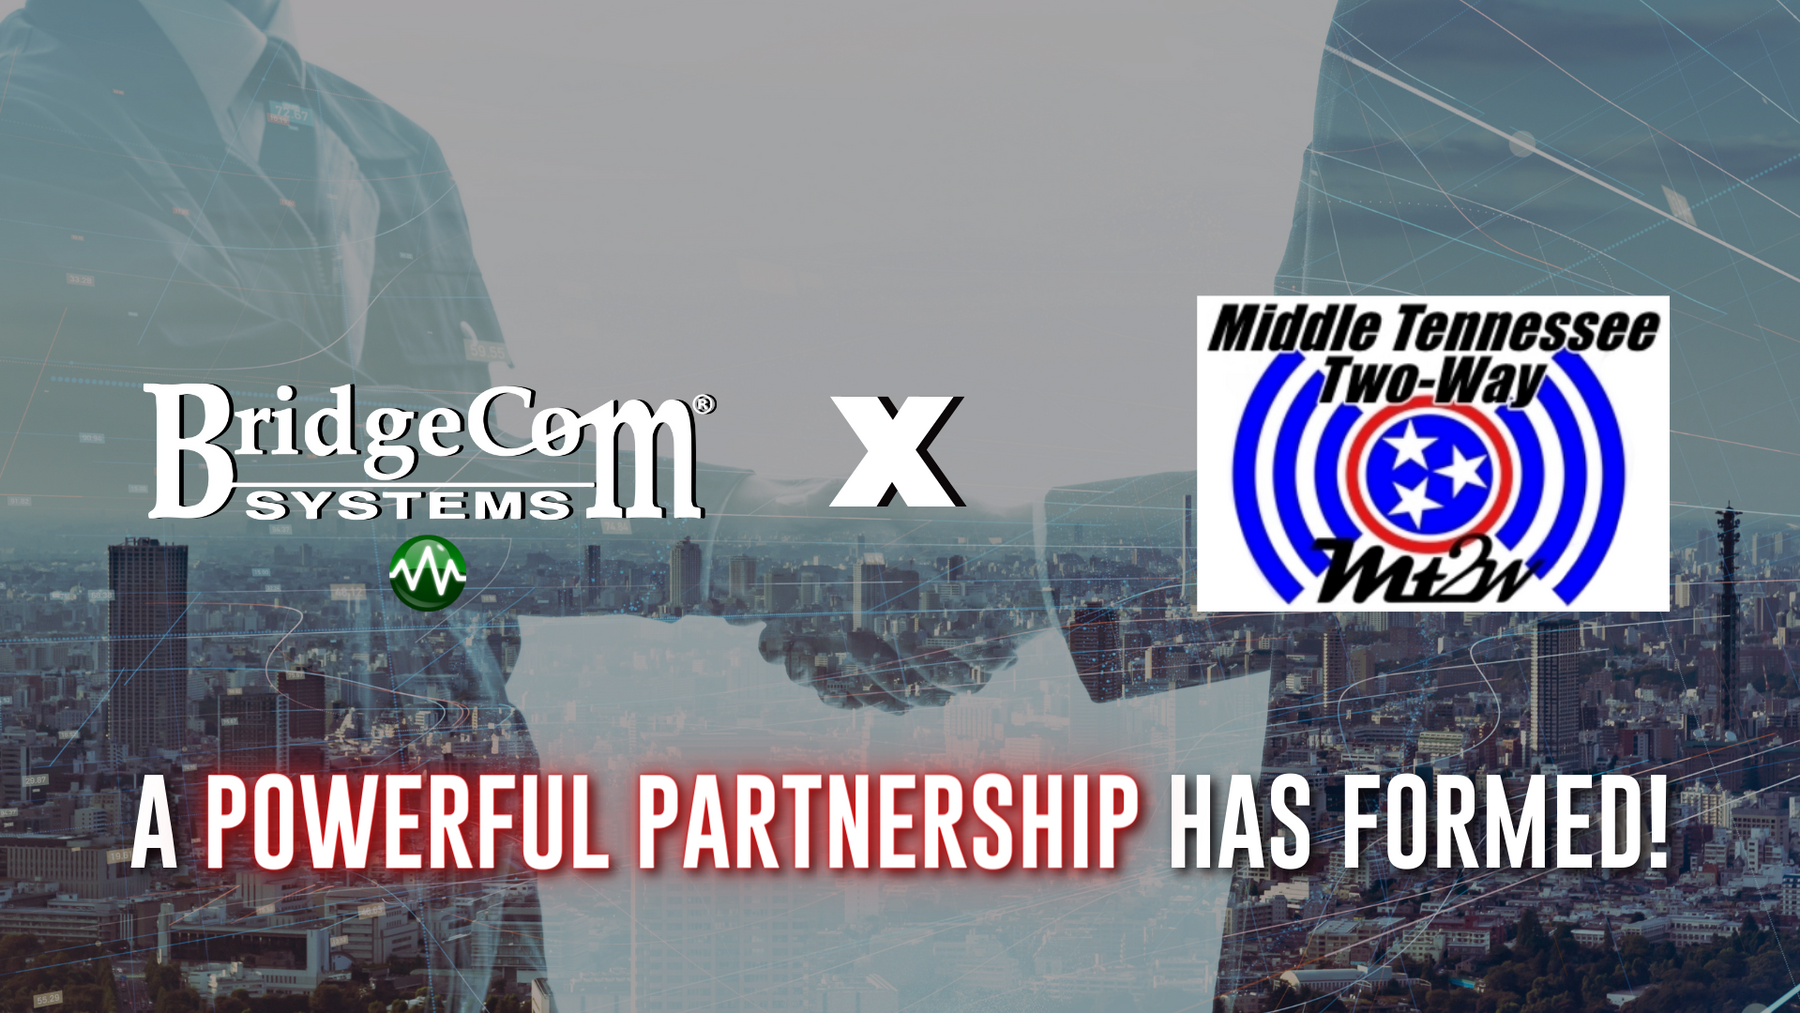 Breaking: BridgeCom Systems and Middle Tennessee Two-Way Join Forces to Form New Partnership!